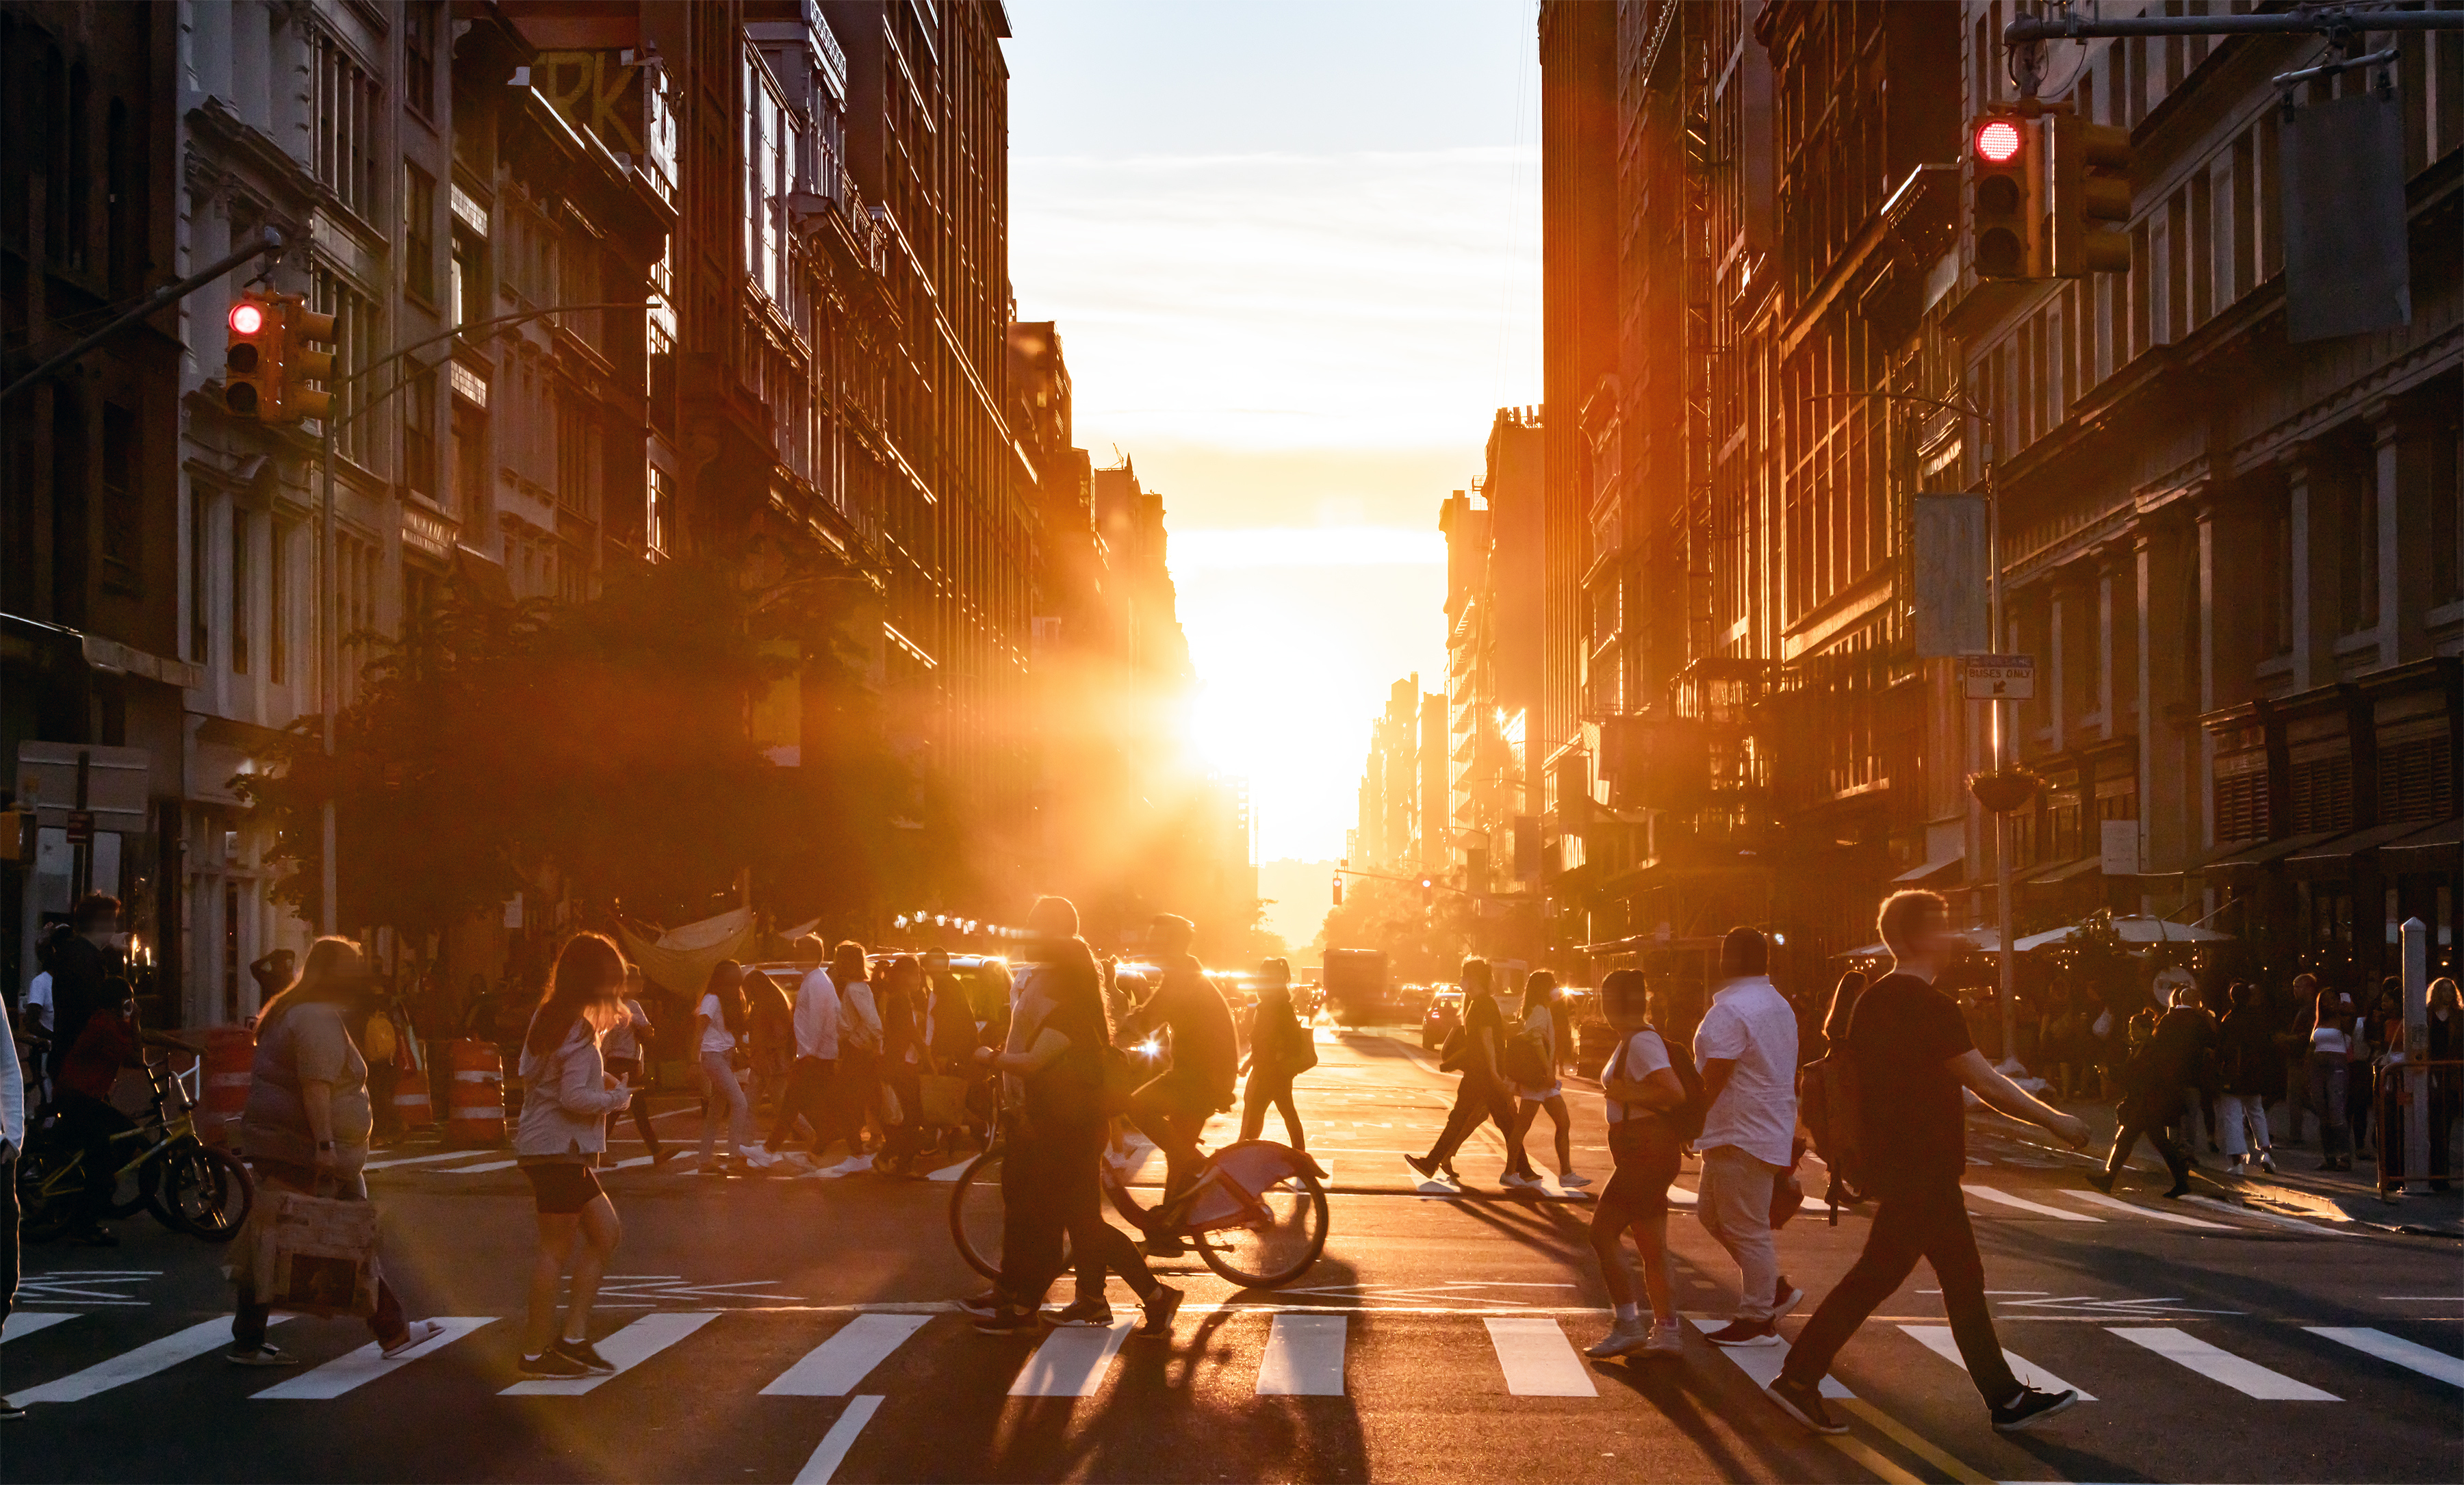 People walking through the busy intersection at 5th Avenue and 23rd Street in New York City on a summer day with sunset flare behind the background buildings